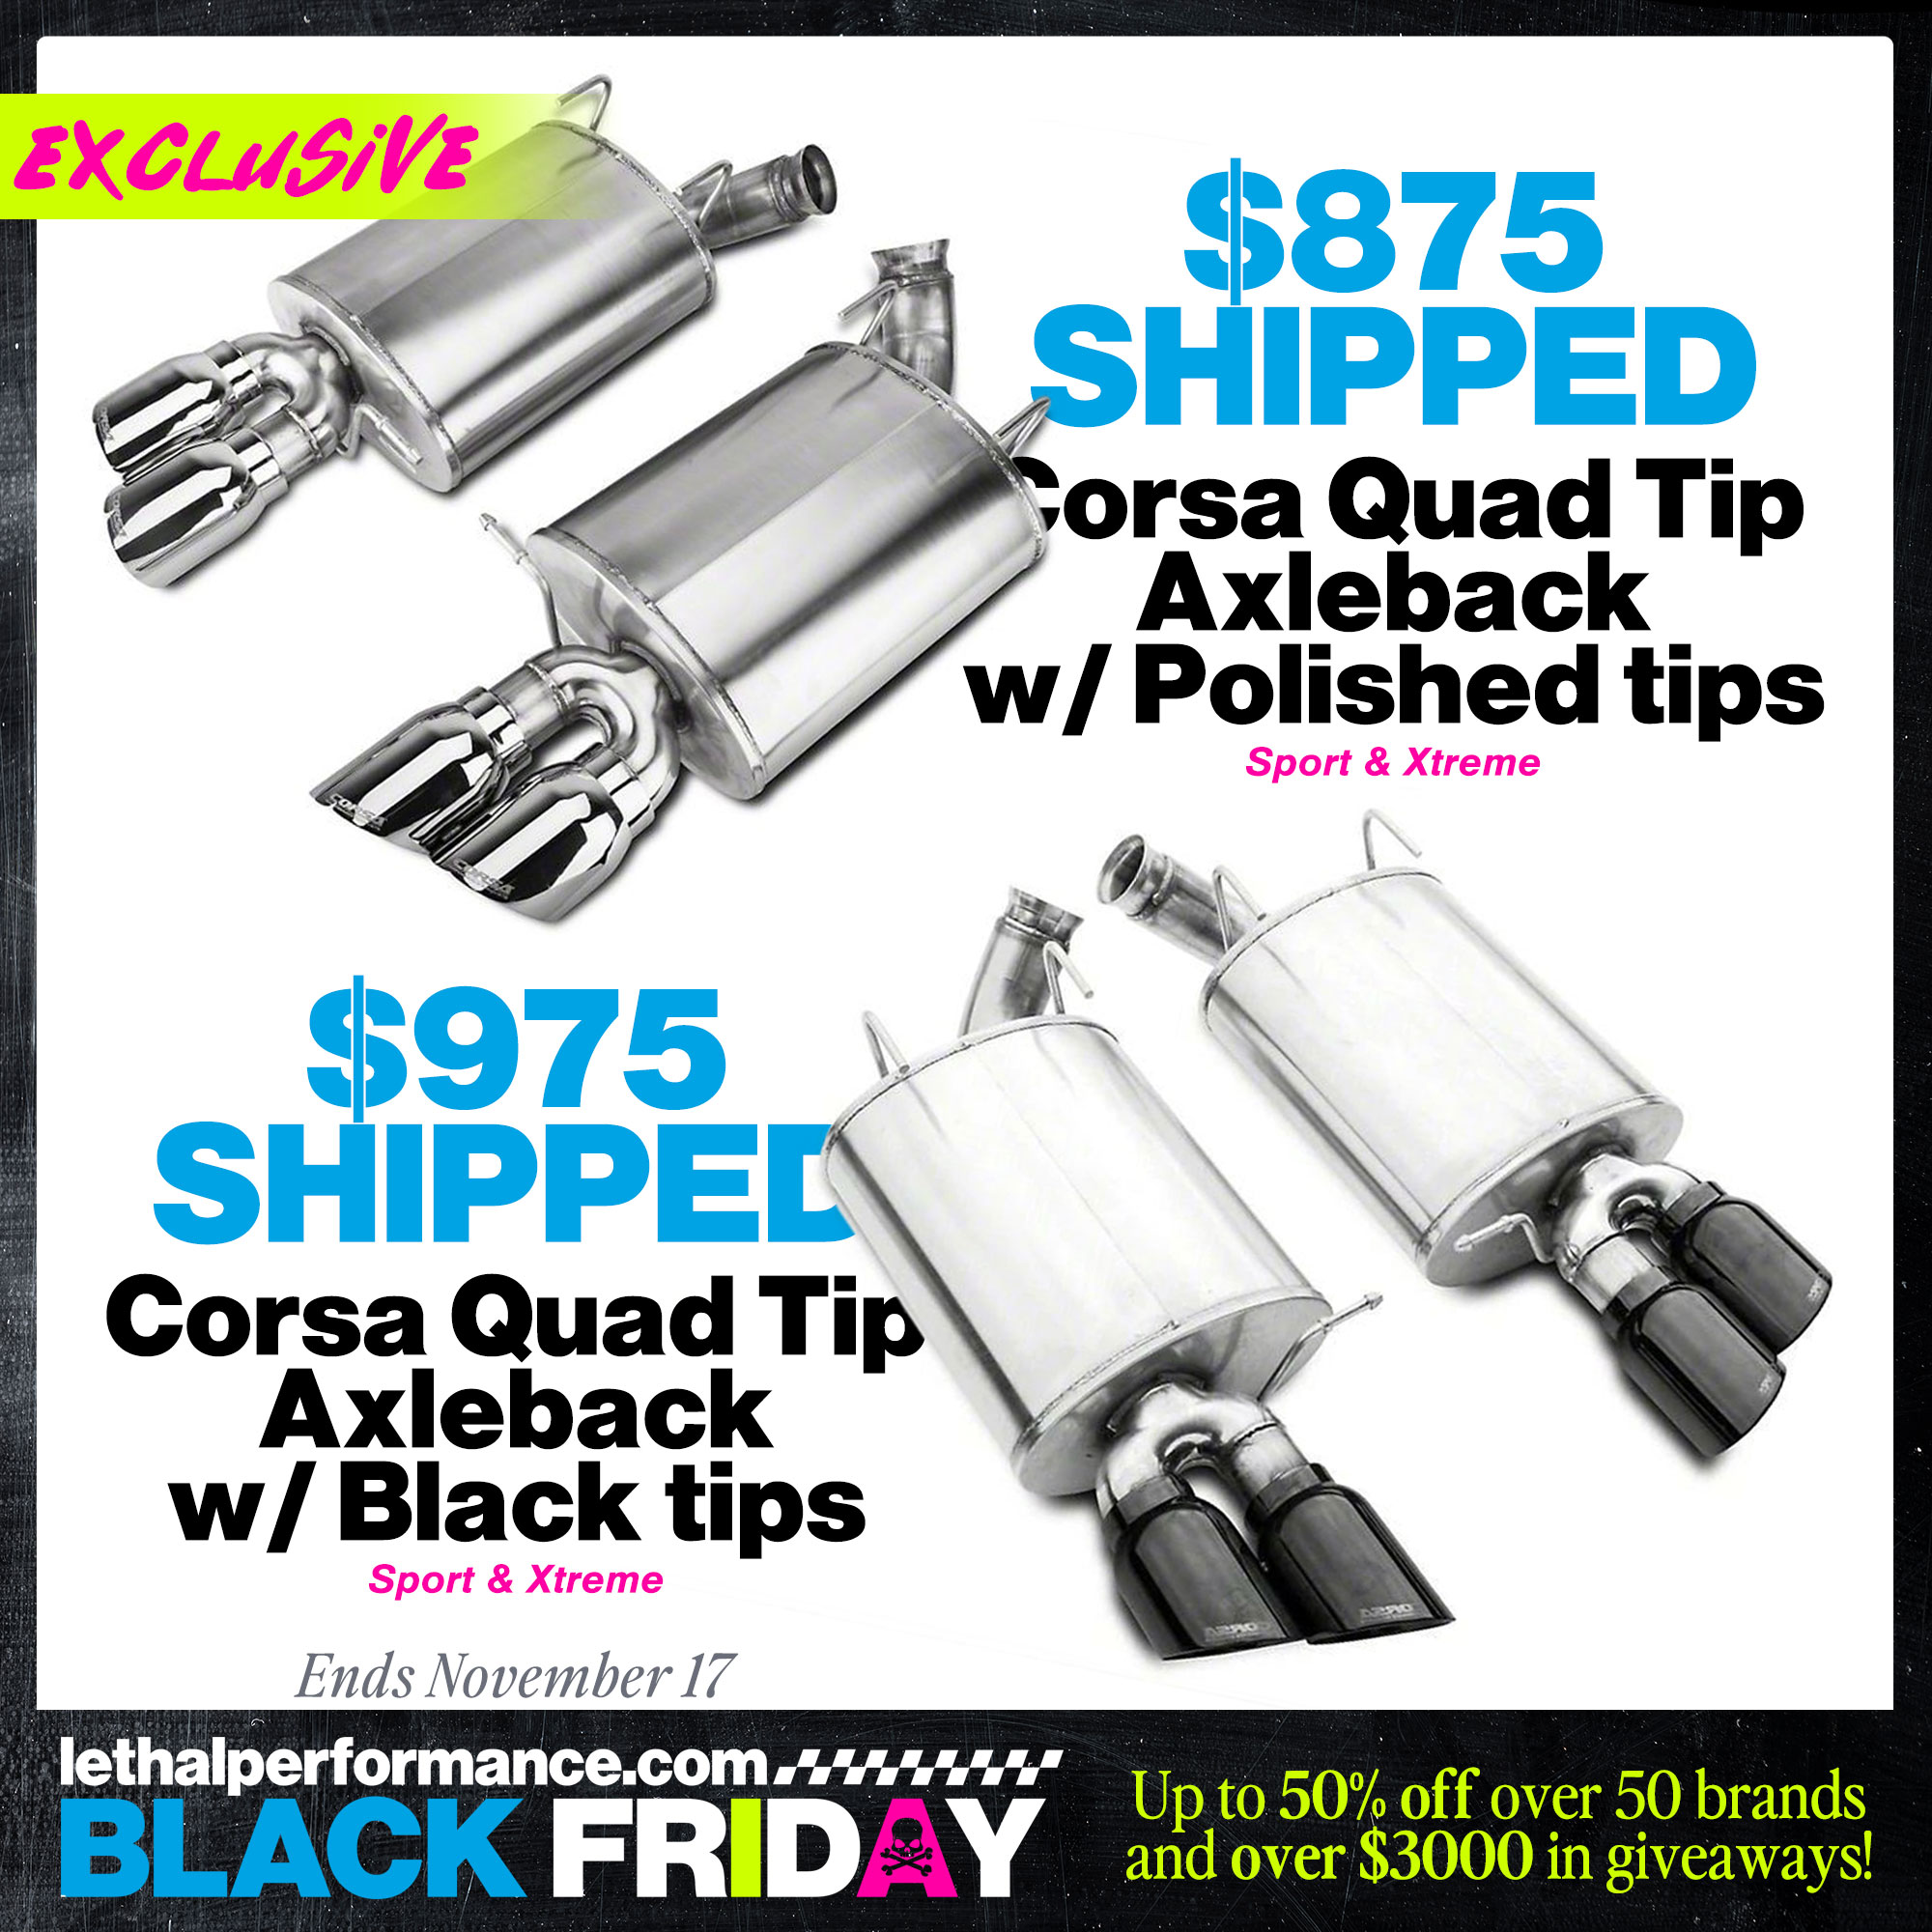 S650 Mustang Black Friday starts NOW! Up to 50% off! CorsaQuadTips